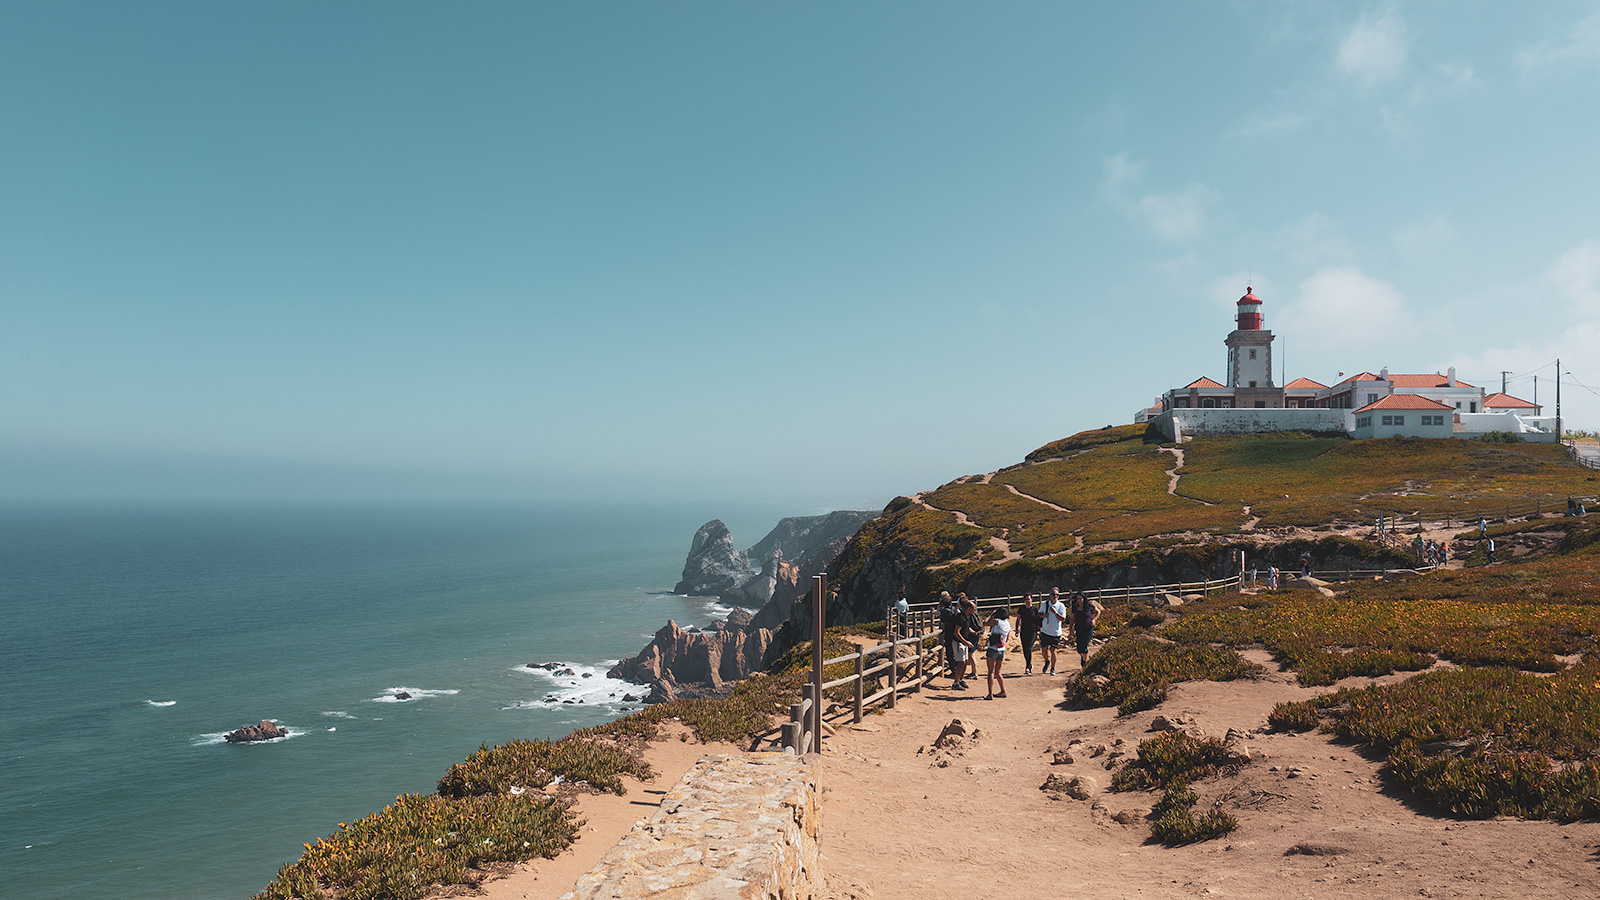 eight of the cliffs at Cabo da Roca is over 100 meters